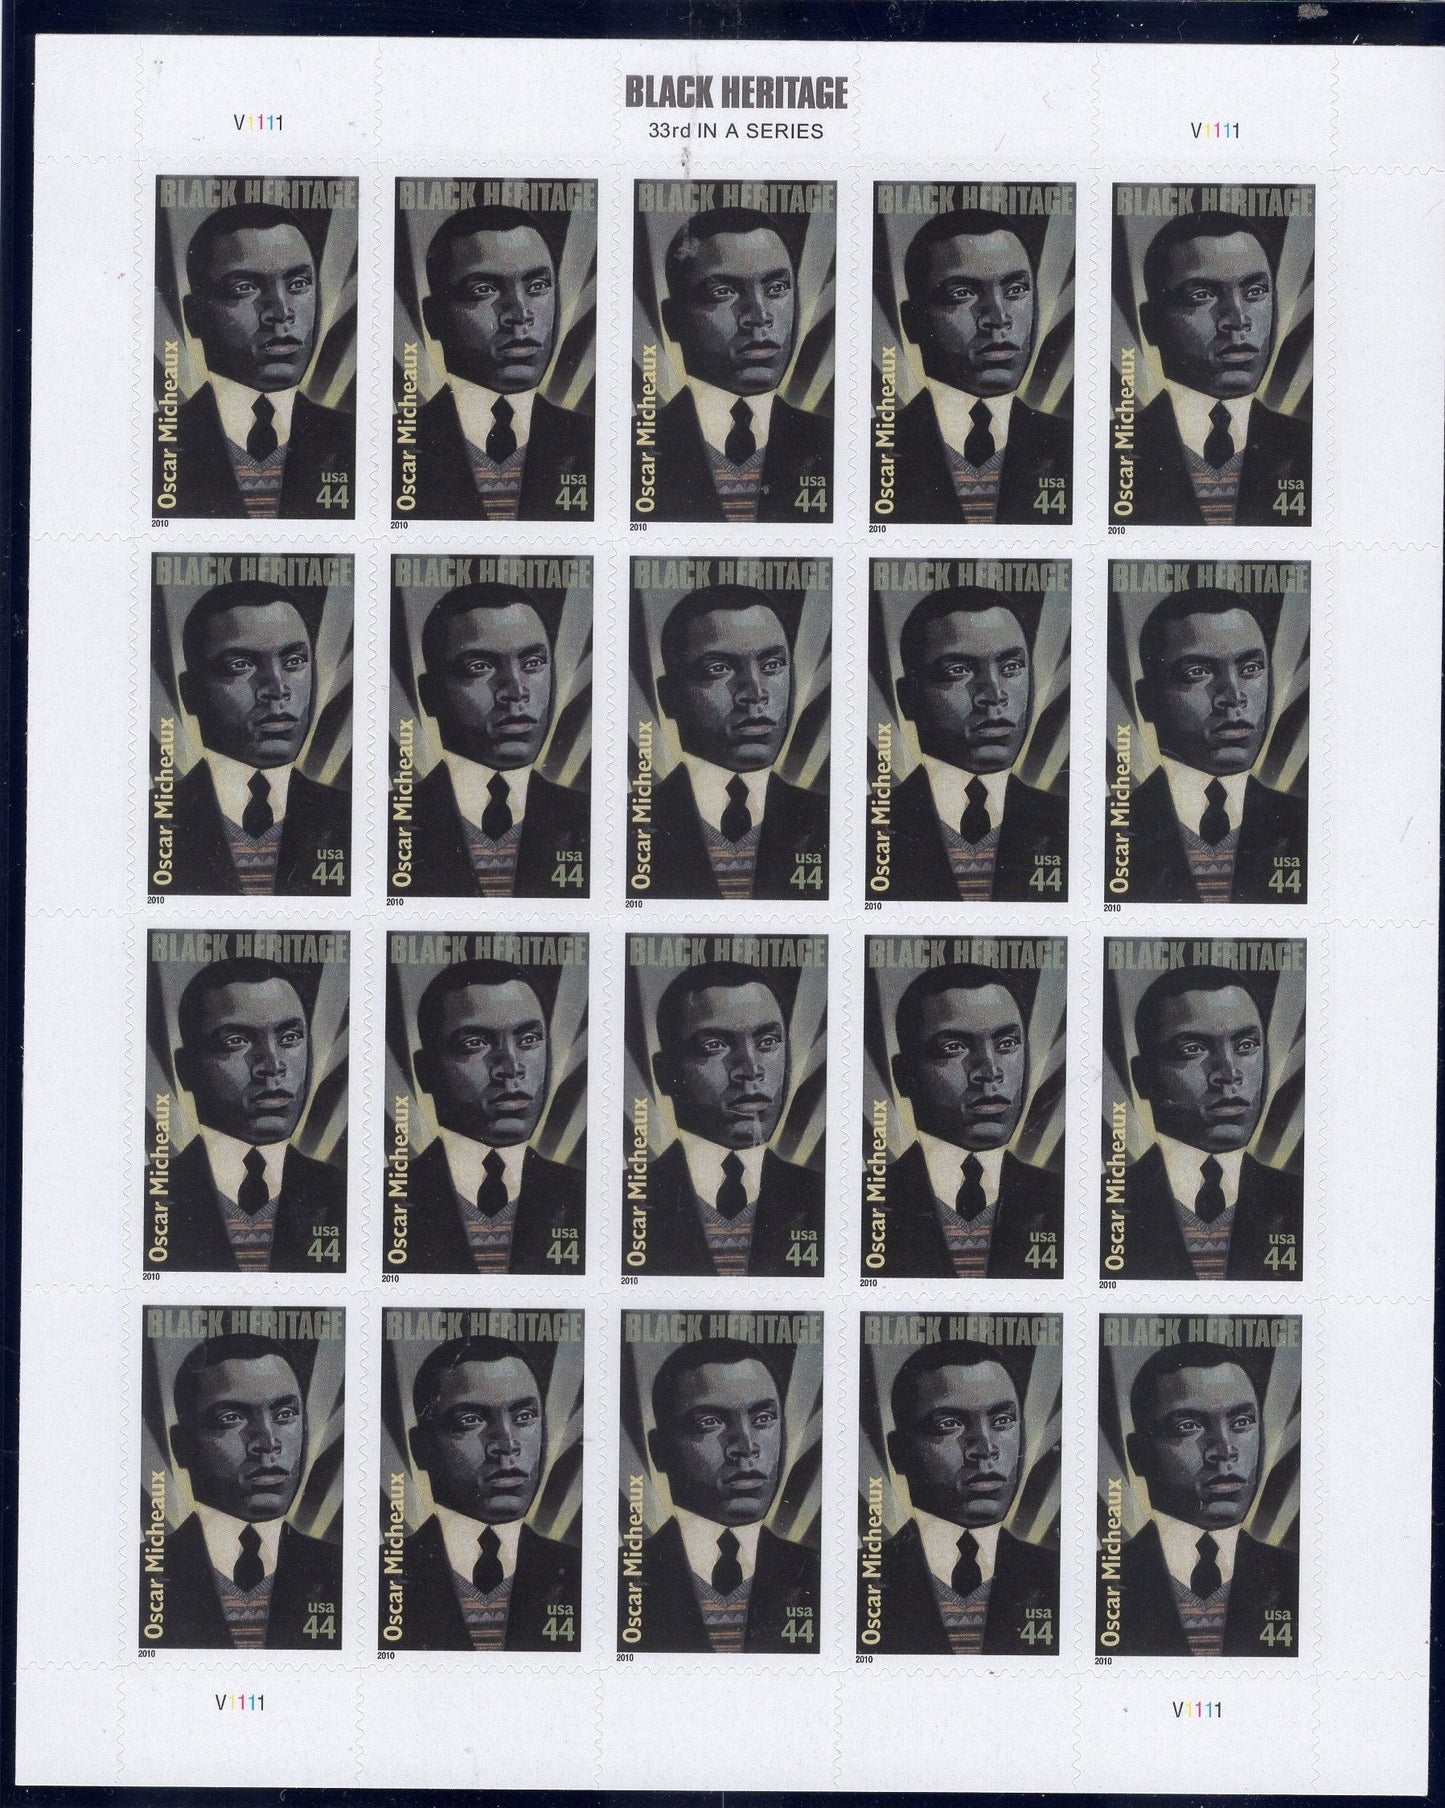 OSCAR MICHEAUX CINEMA Film Director Black American Heritage Sheet of 20 - Issued in 2010 - s4464 - Quick